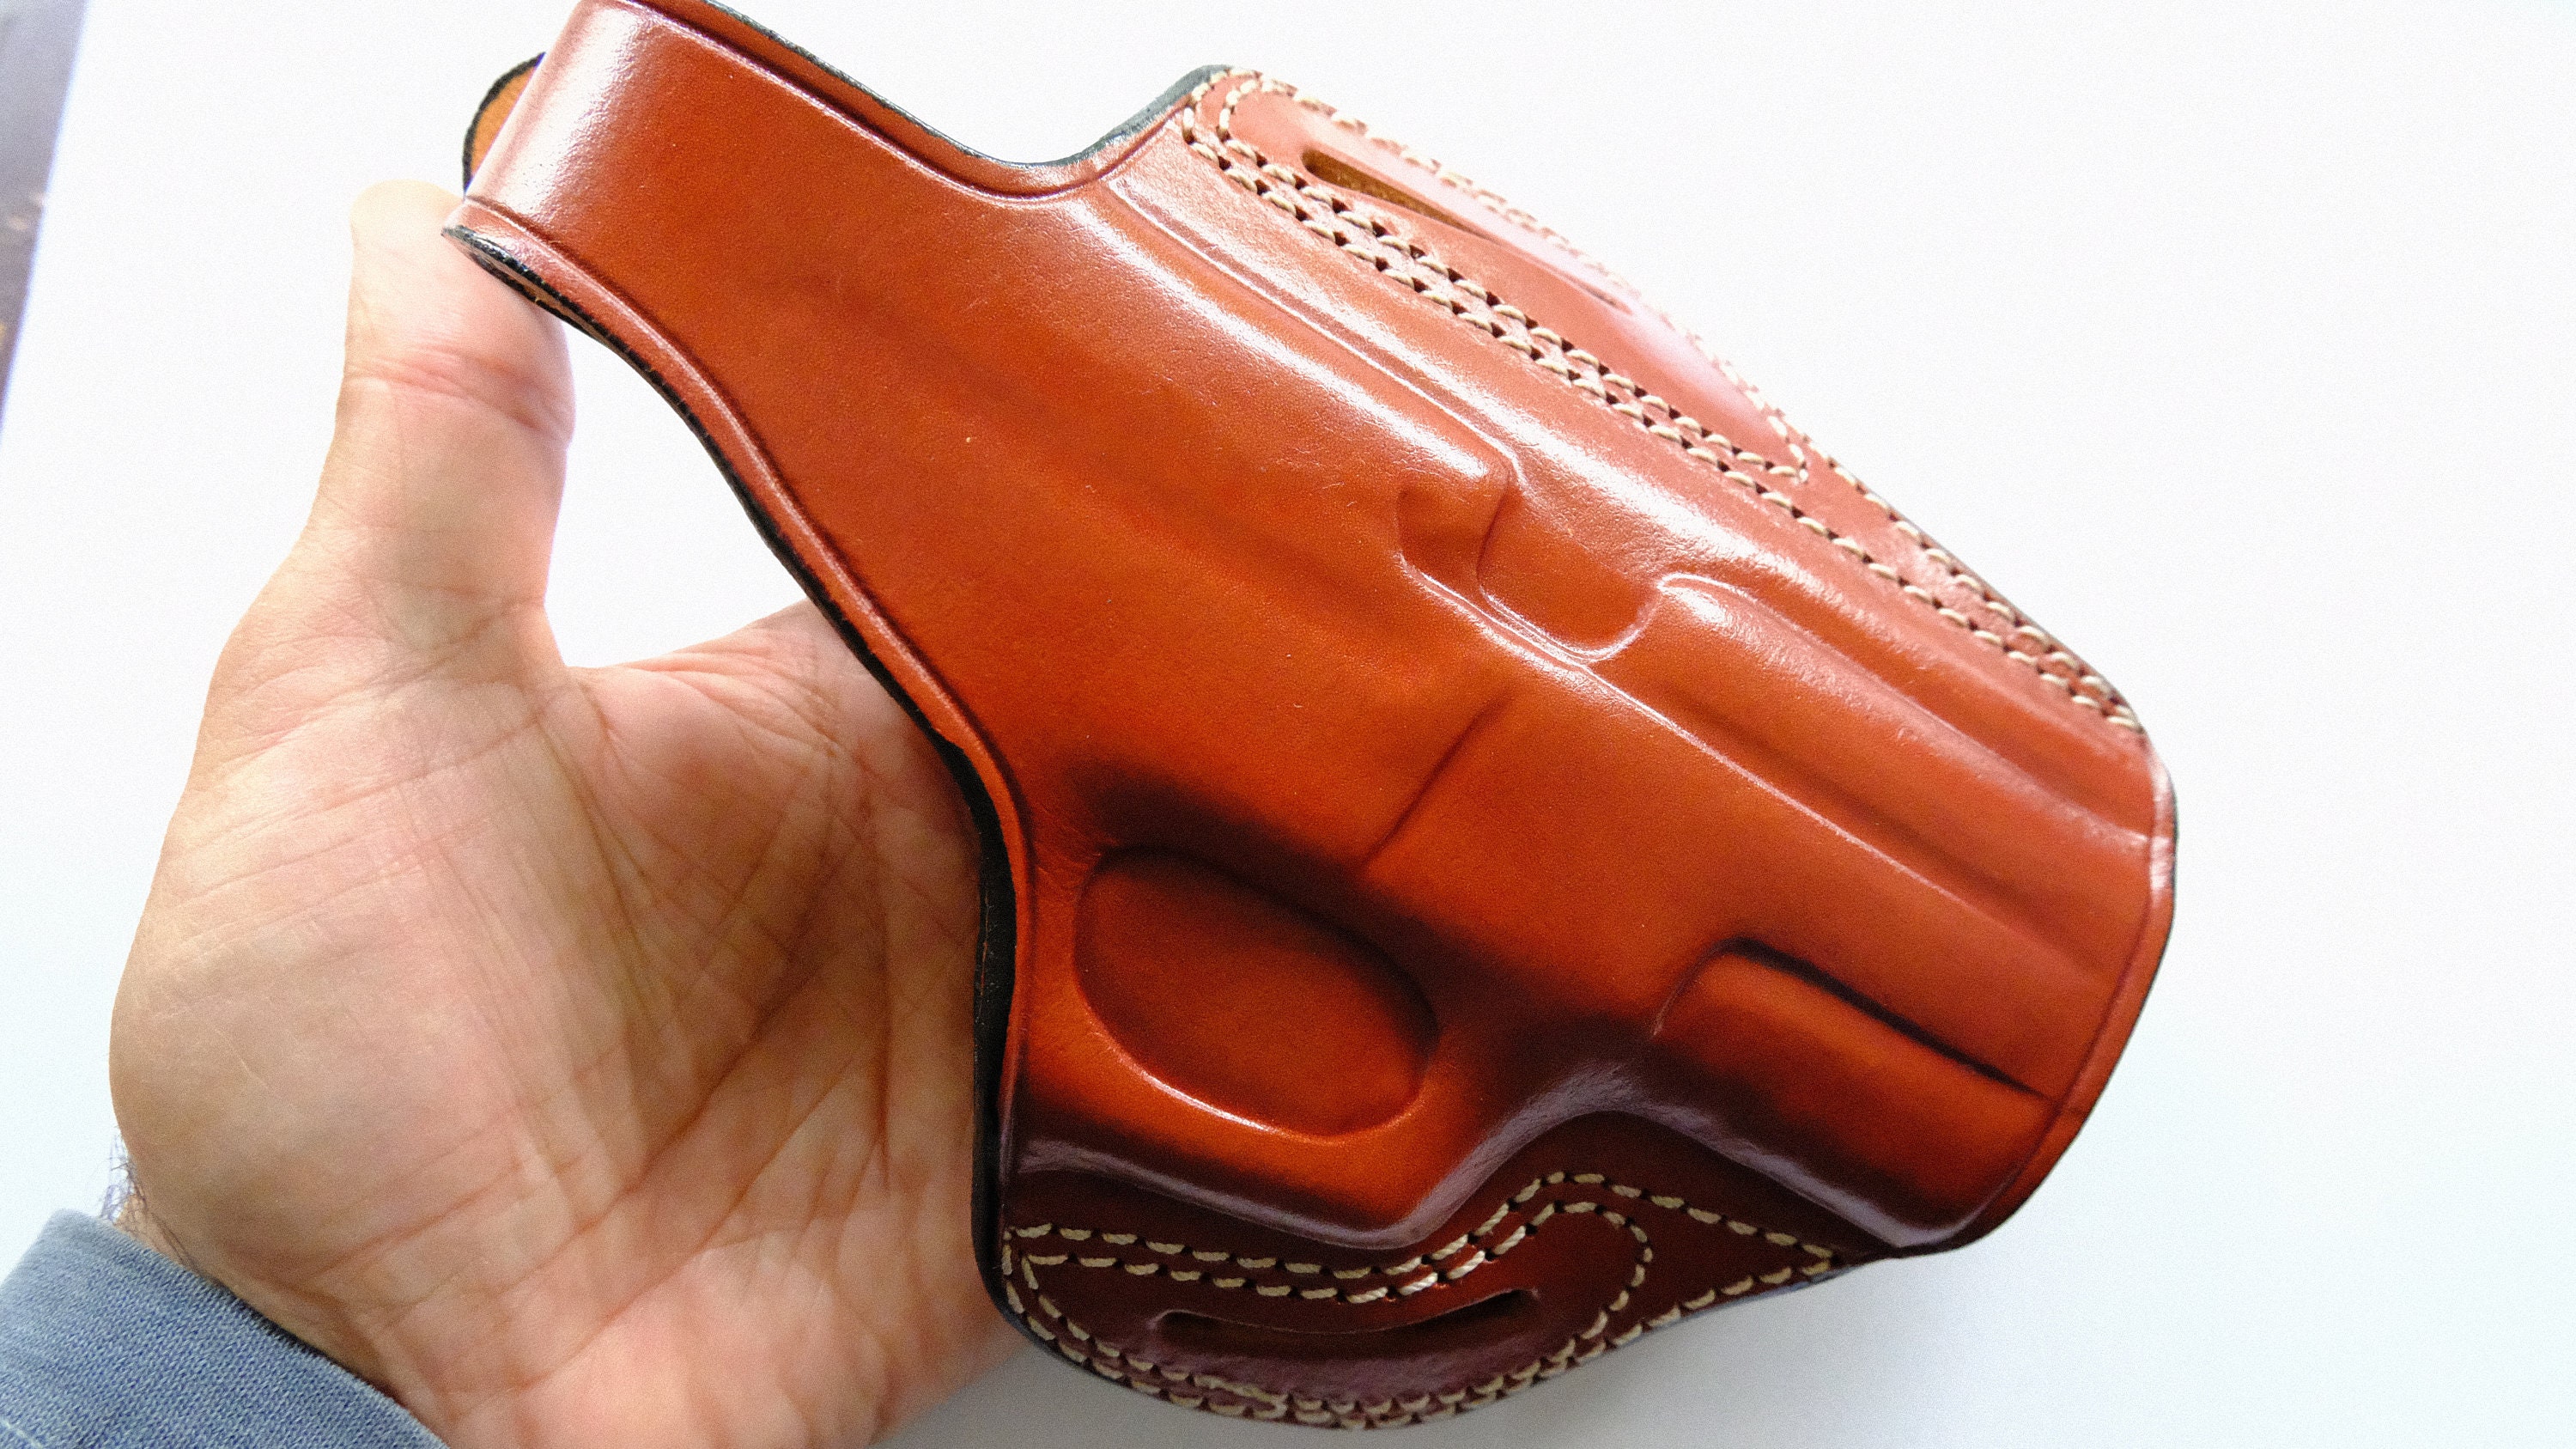 Sig Sauer SP2022 Nitron Premium Leather OWB Holster Handcrafted 